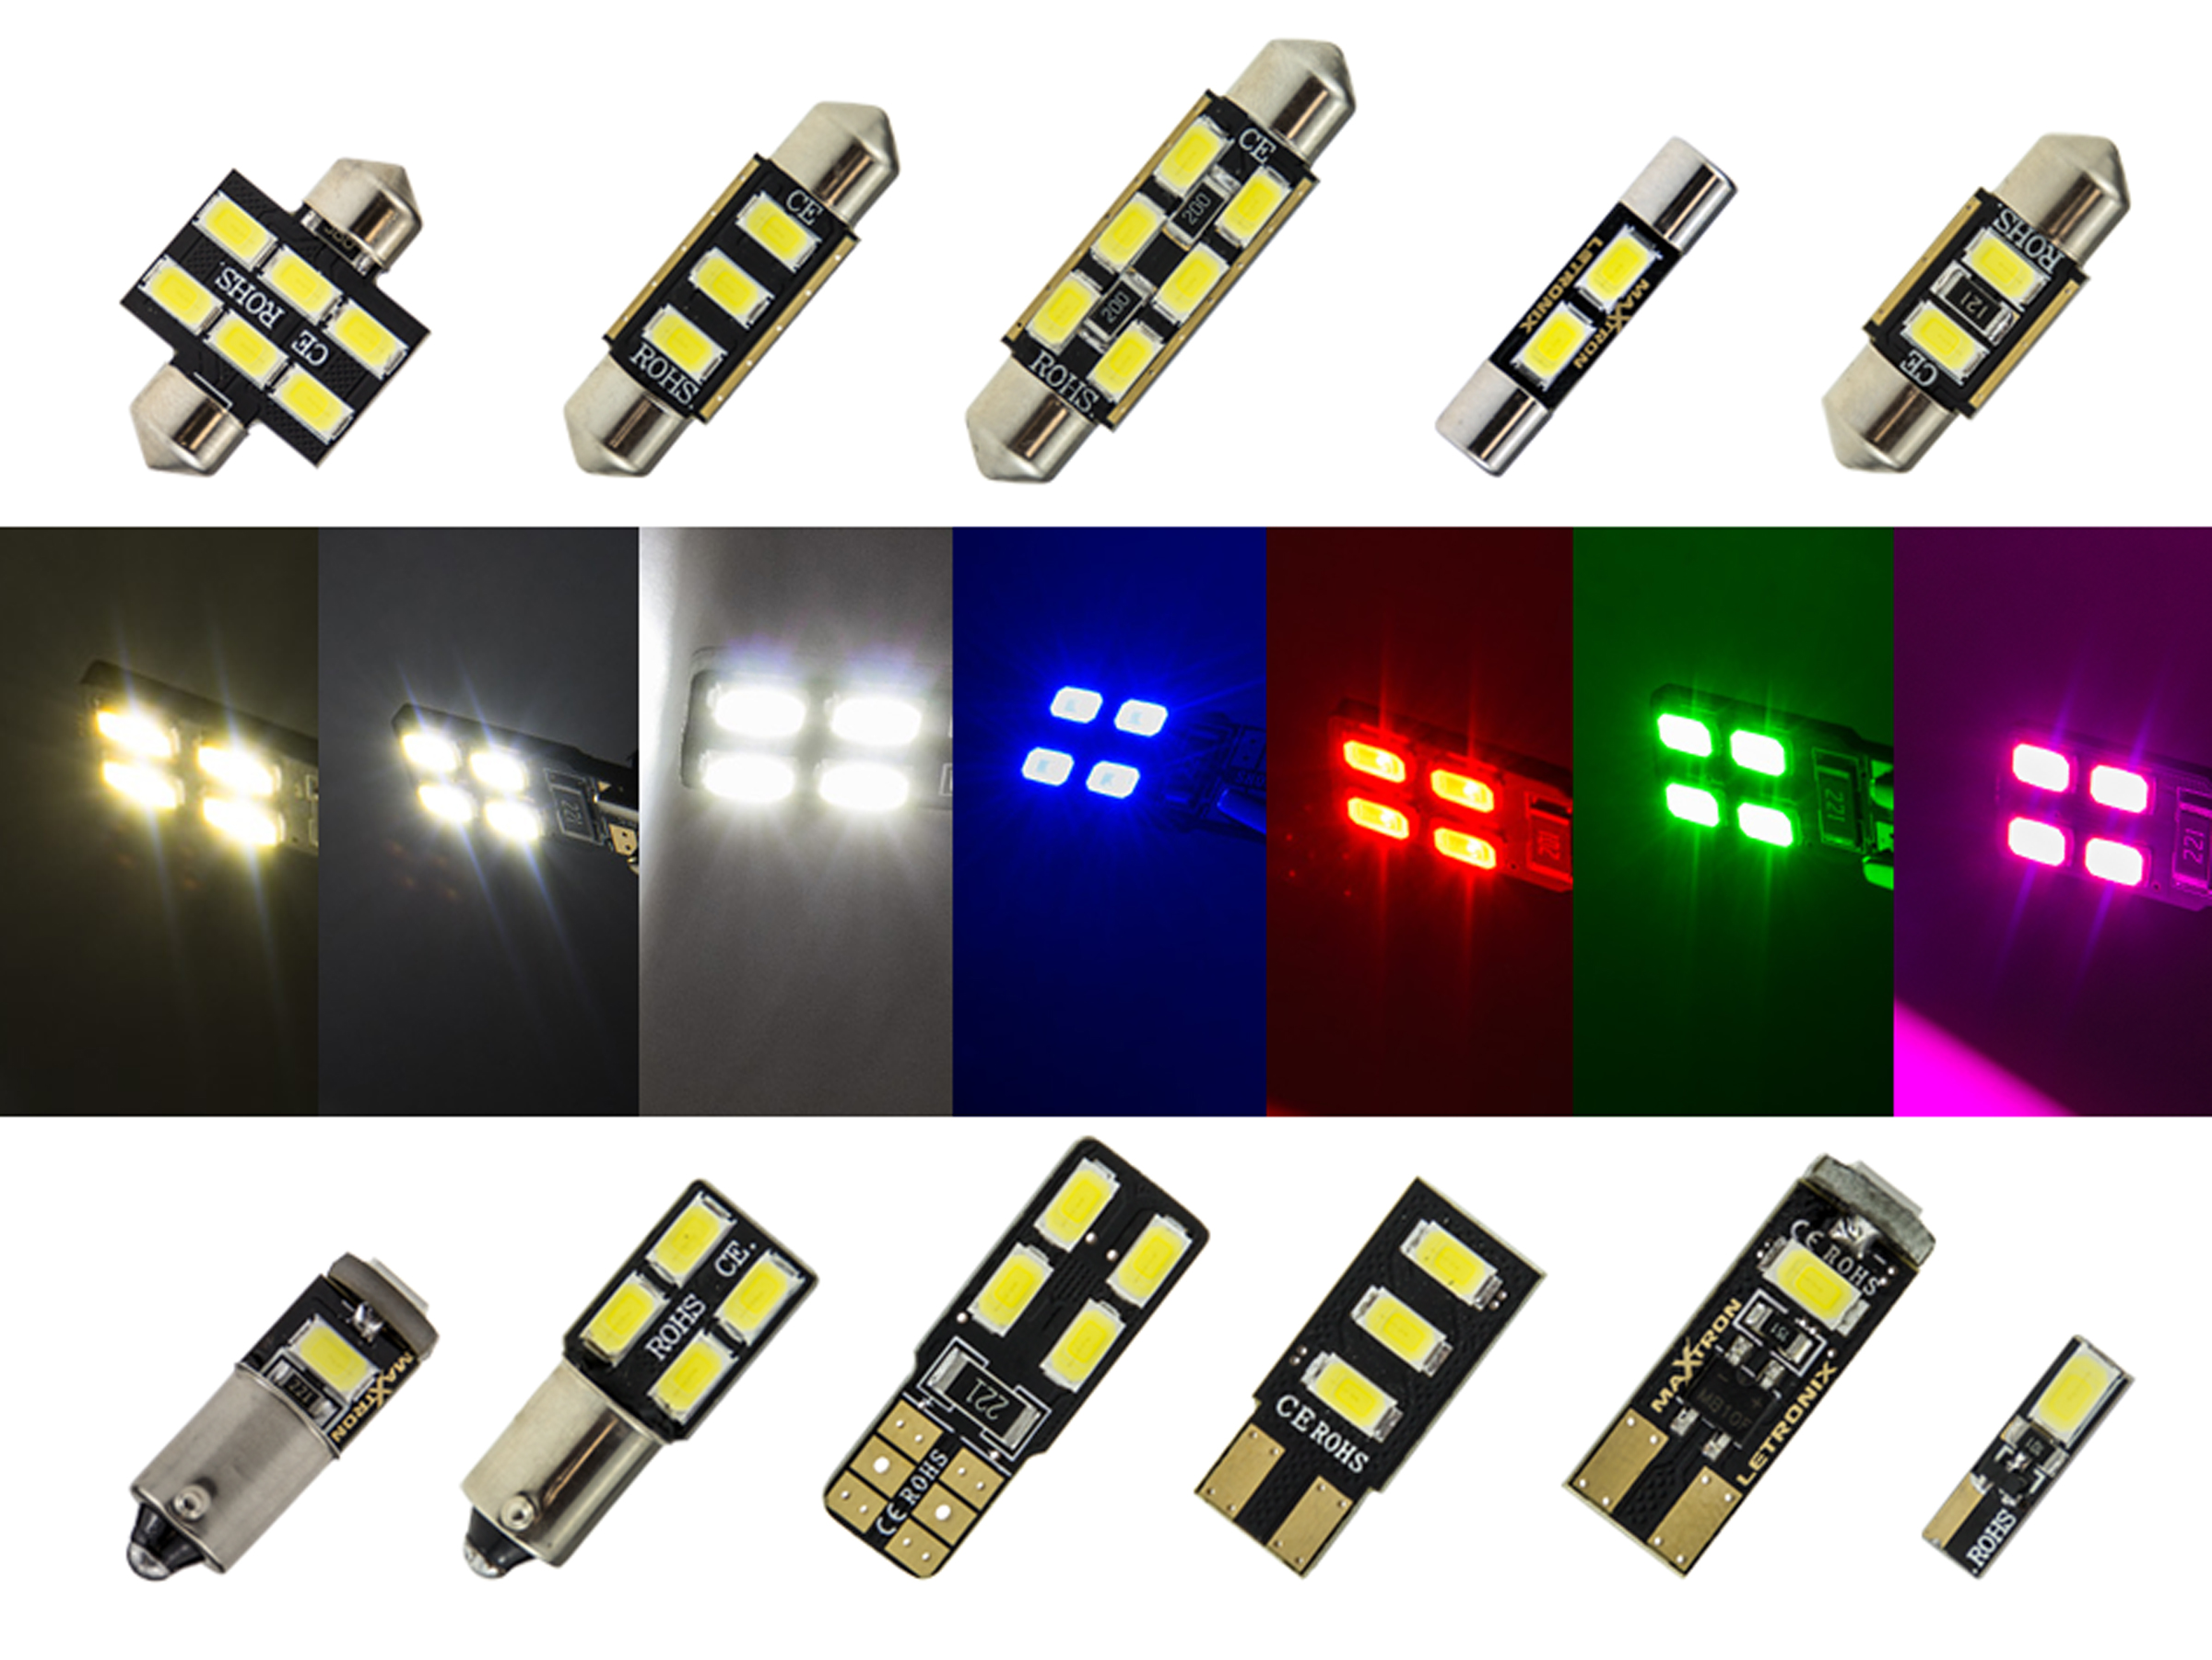 https://www.blauertacho4u.de/images/product_images/original_images/MaXtron---SMD-LED-Innenraumbeleuchtung-passend-fuer-BMW-3er-E46-Coupe55811246_2.jpg